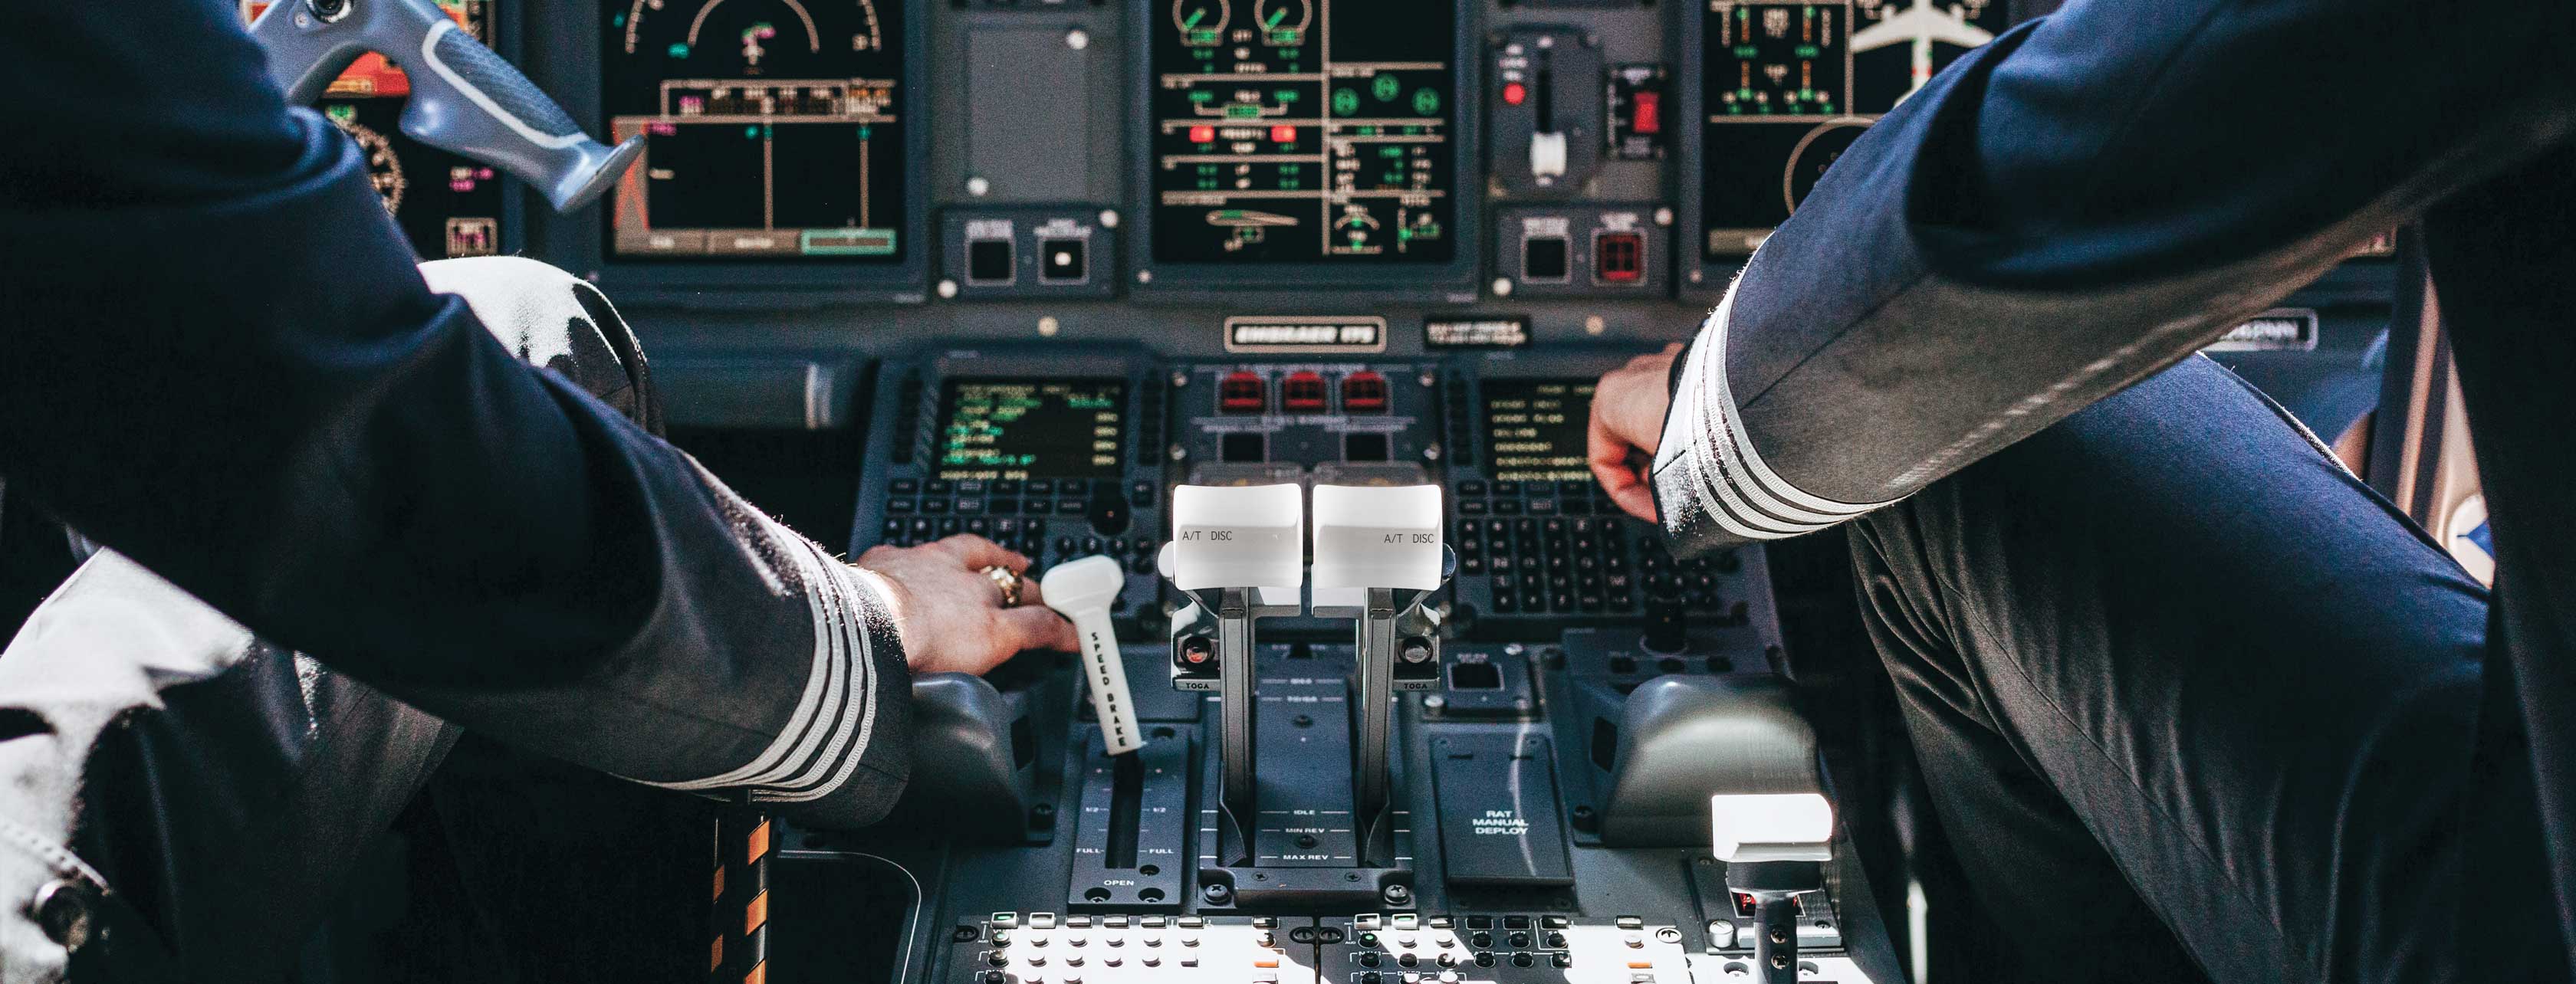 Senior Captains Earn the Most Airline Pilot Salary